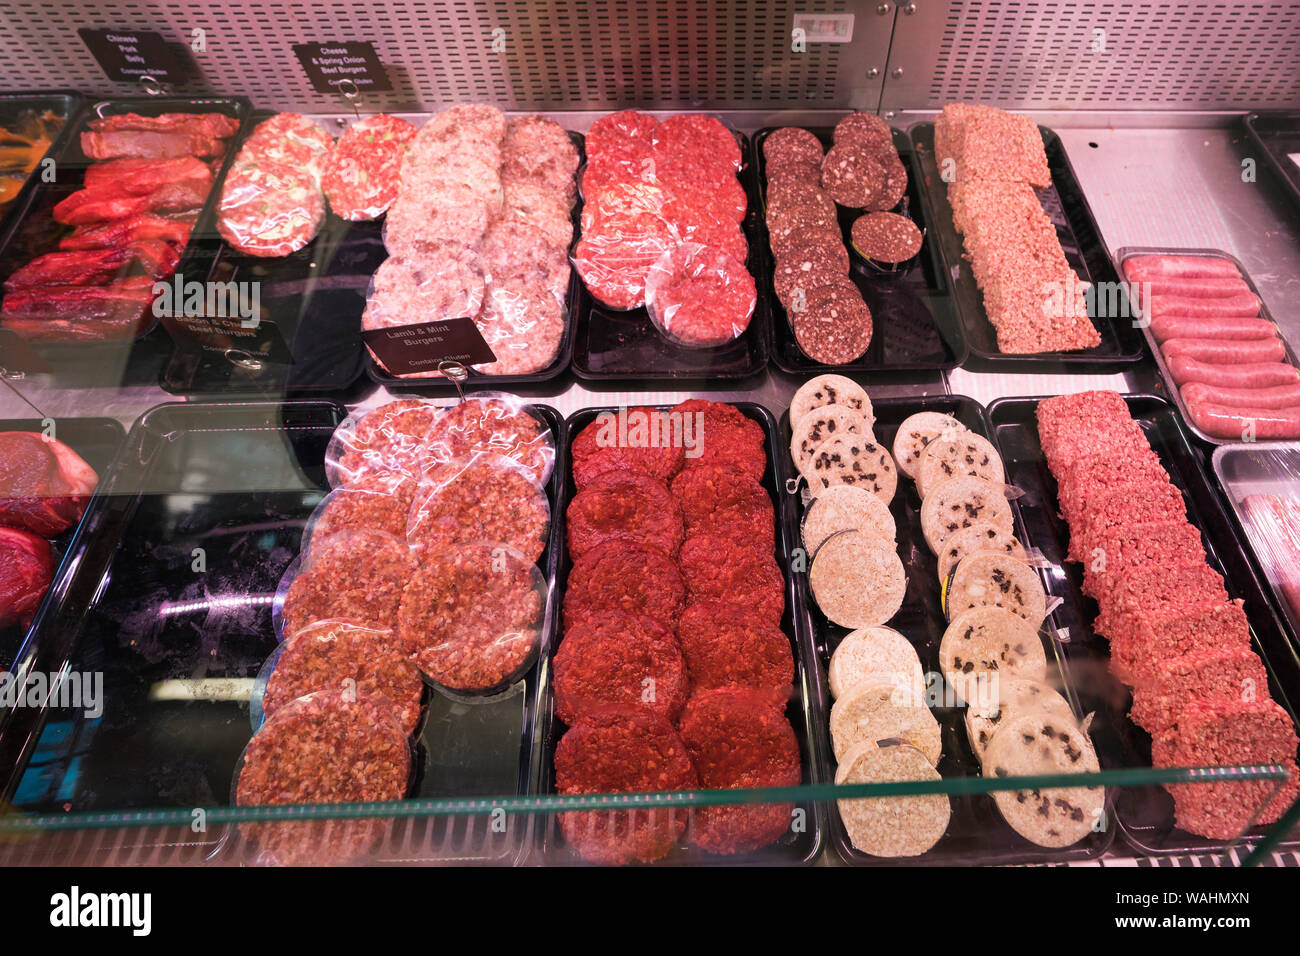 Slices of Blood pudding, or black pudding, displayed for sale inside a shop in Stornoway, Isle of Lewis, Scotland, UK, Europe Stock Photo